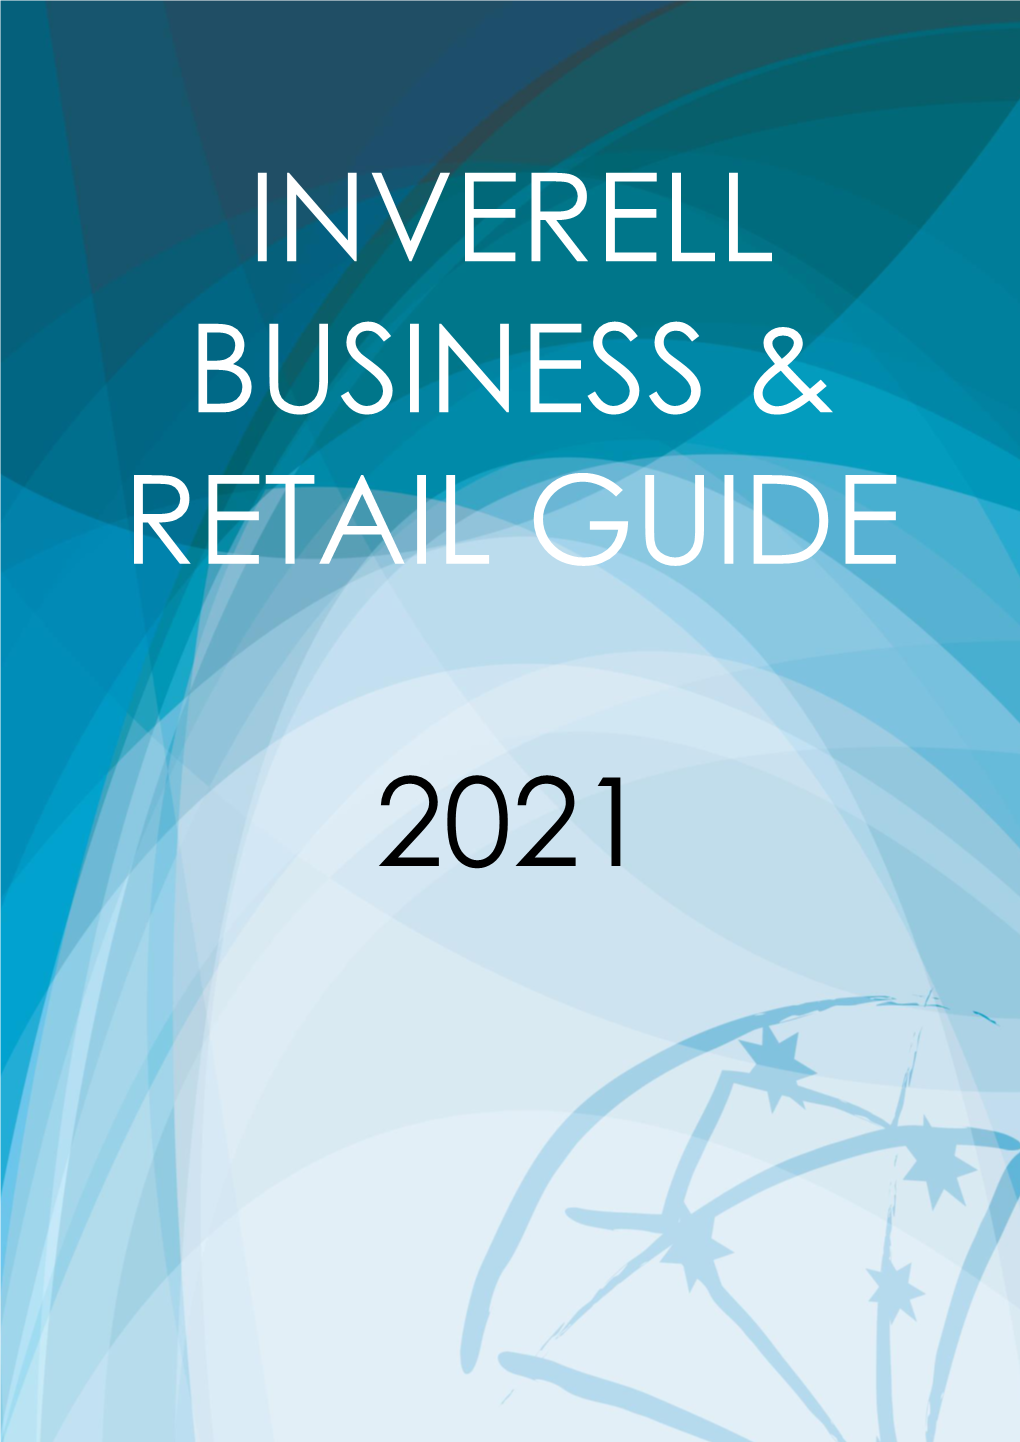 Inverell Business & Retail Guide